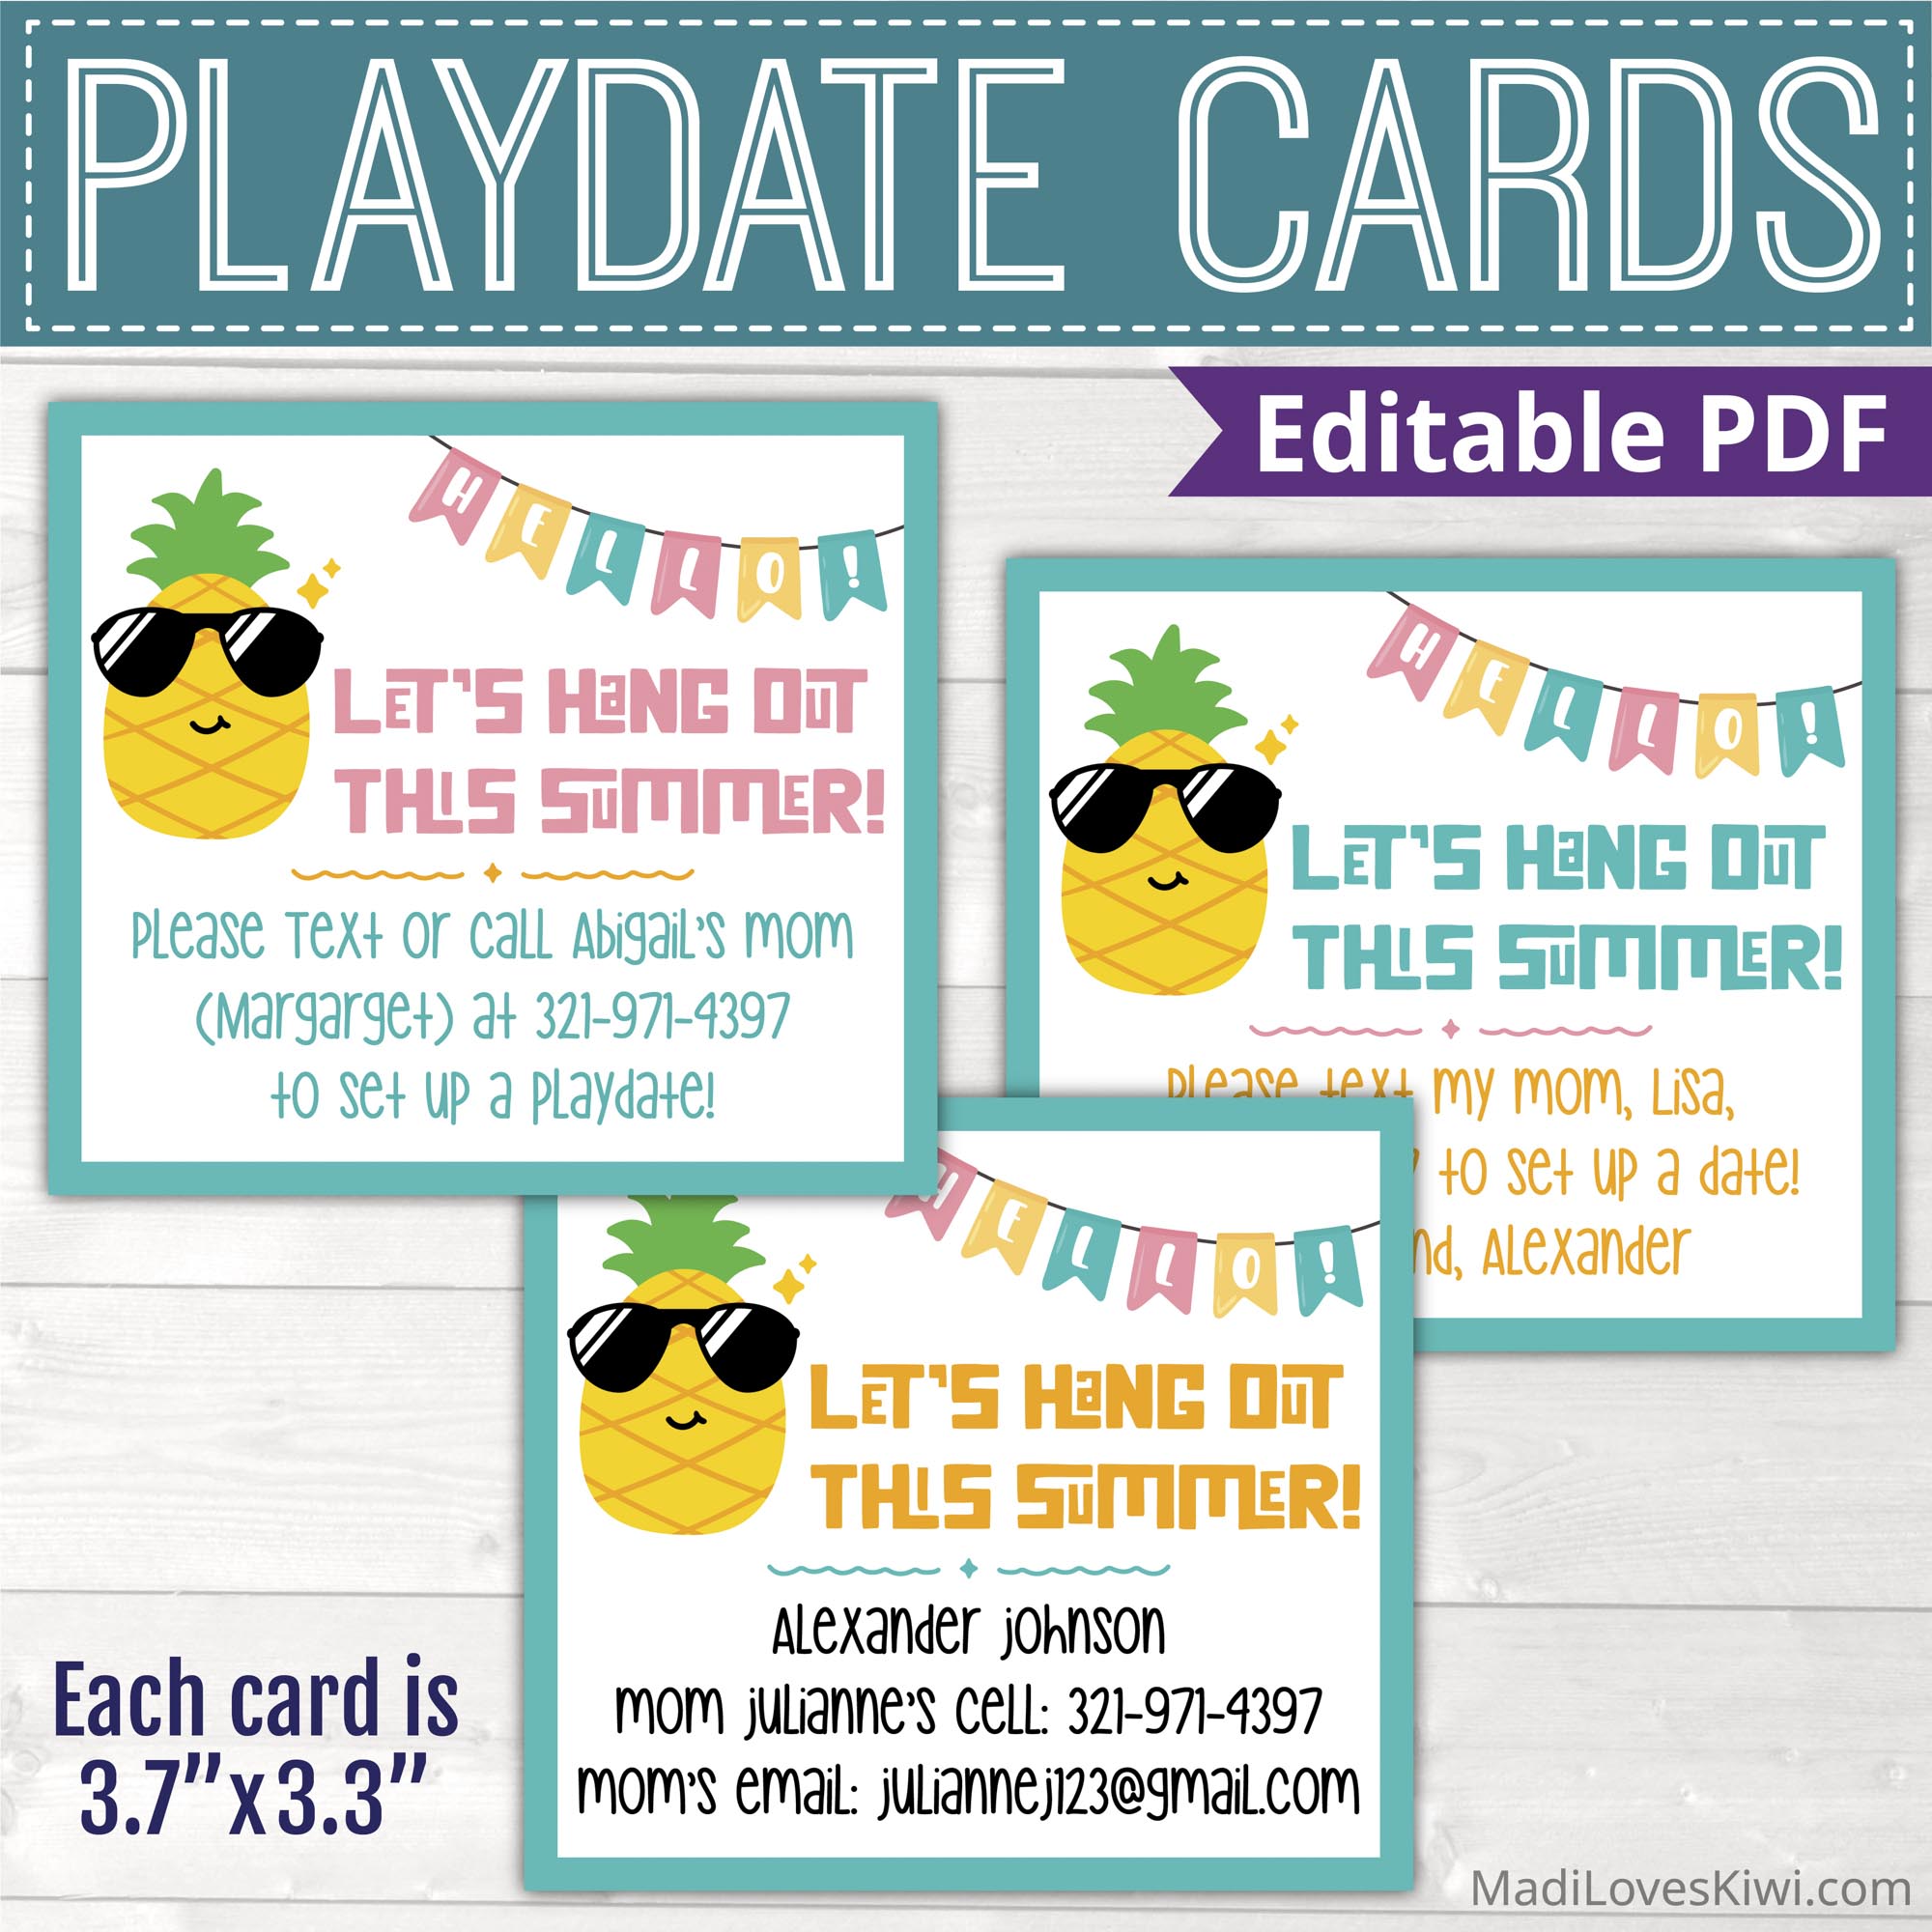 printable-playdate-card-for-kid-pineapple-summer-play-date-card-keep-in-touch-madi-loves